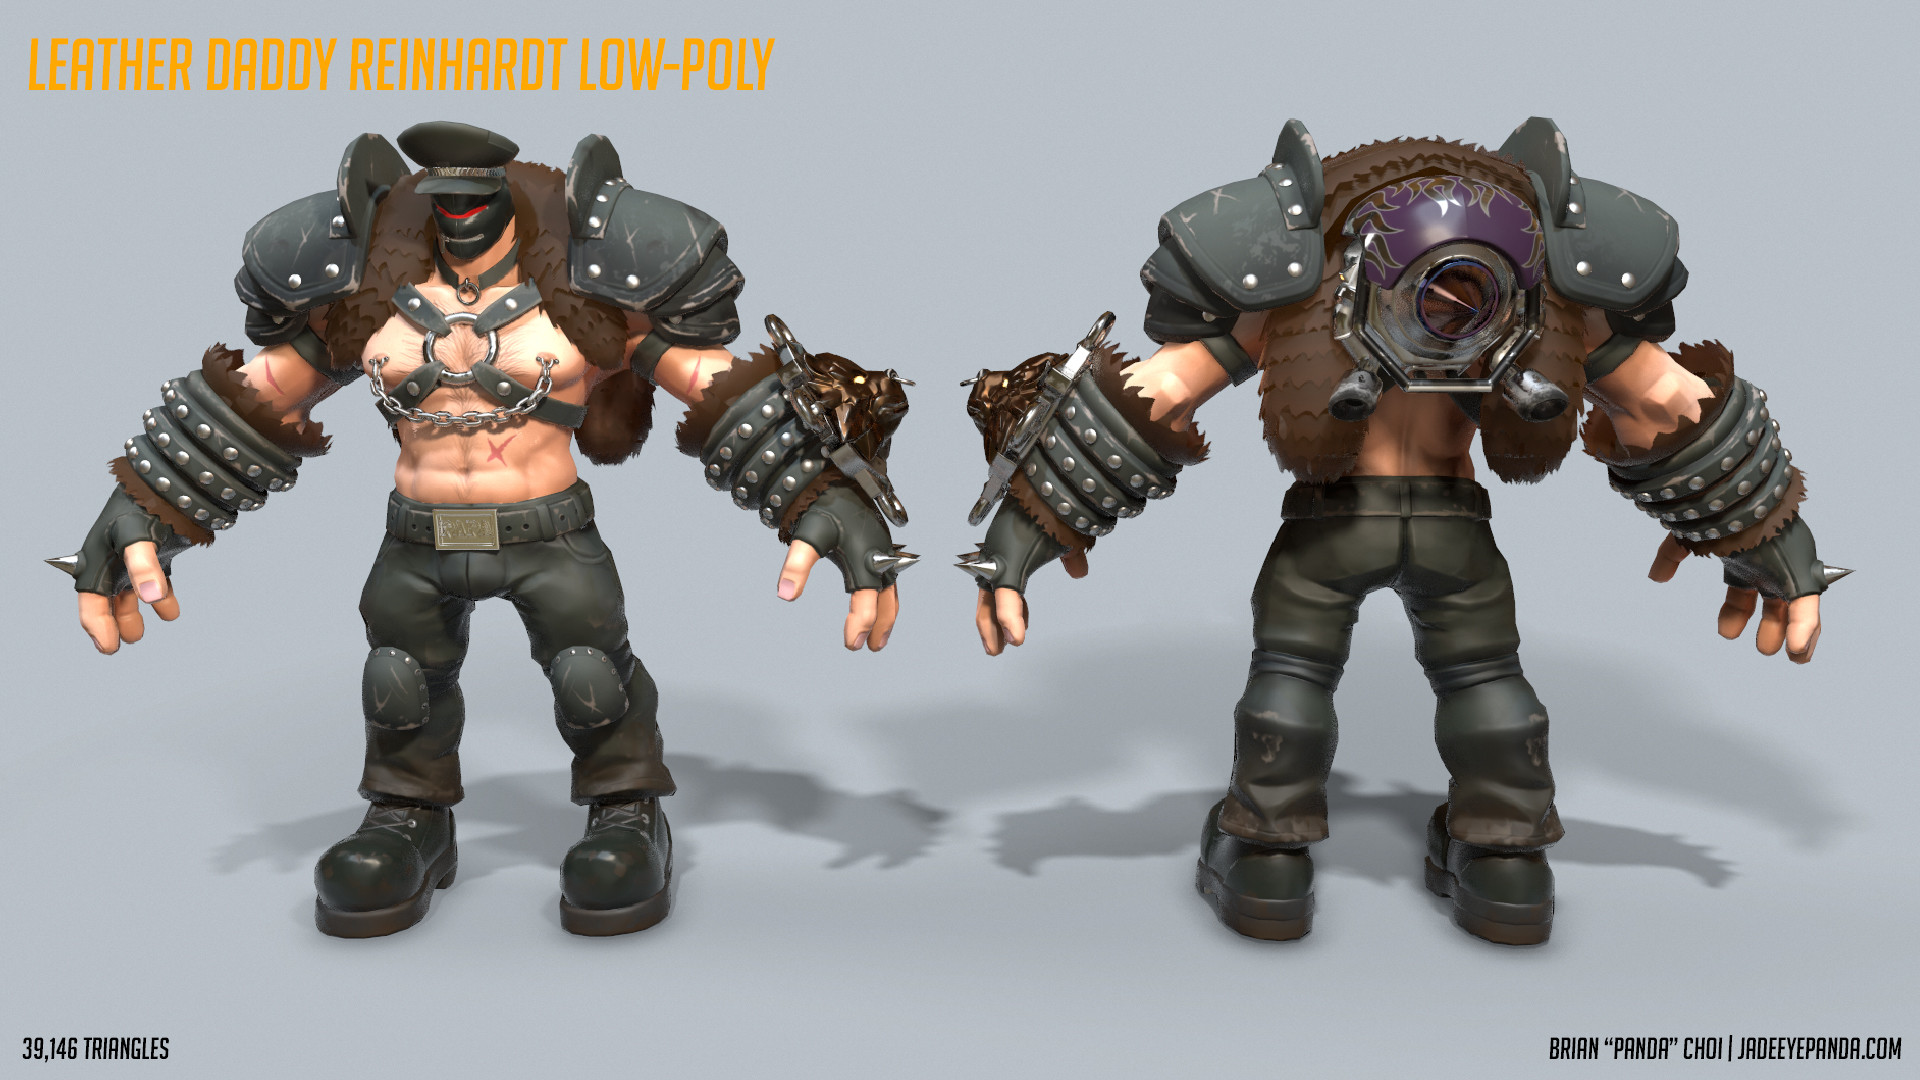 Leather Daddy Reinhardt Is Not An Official Overwatch Skin